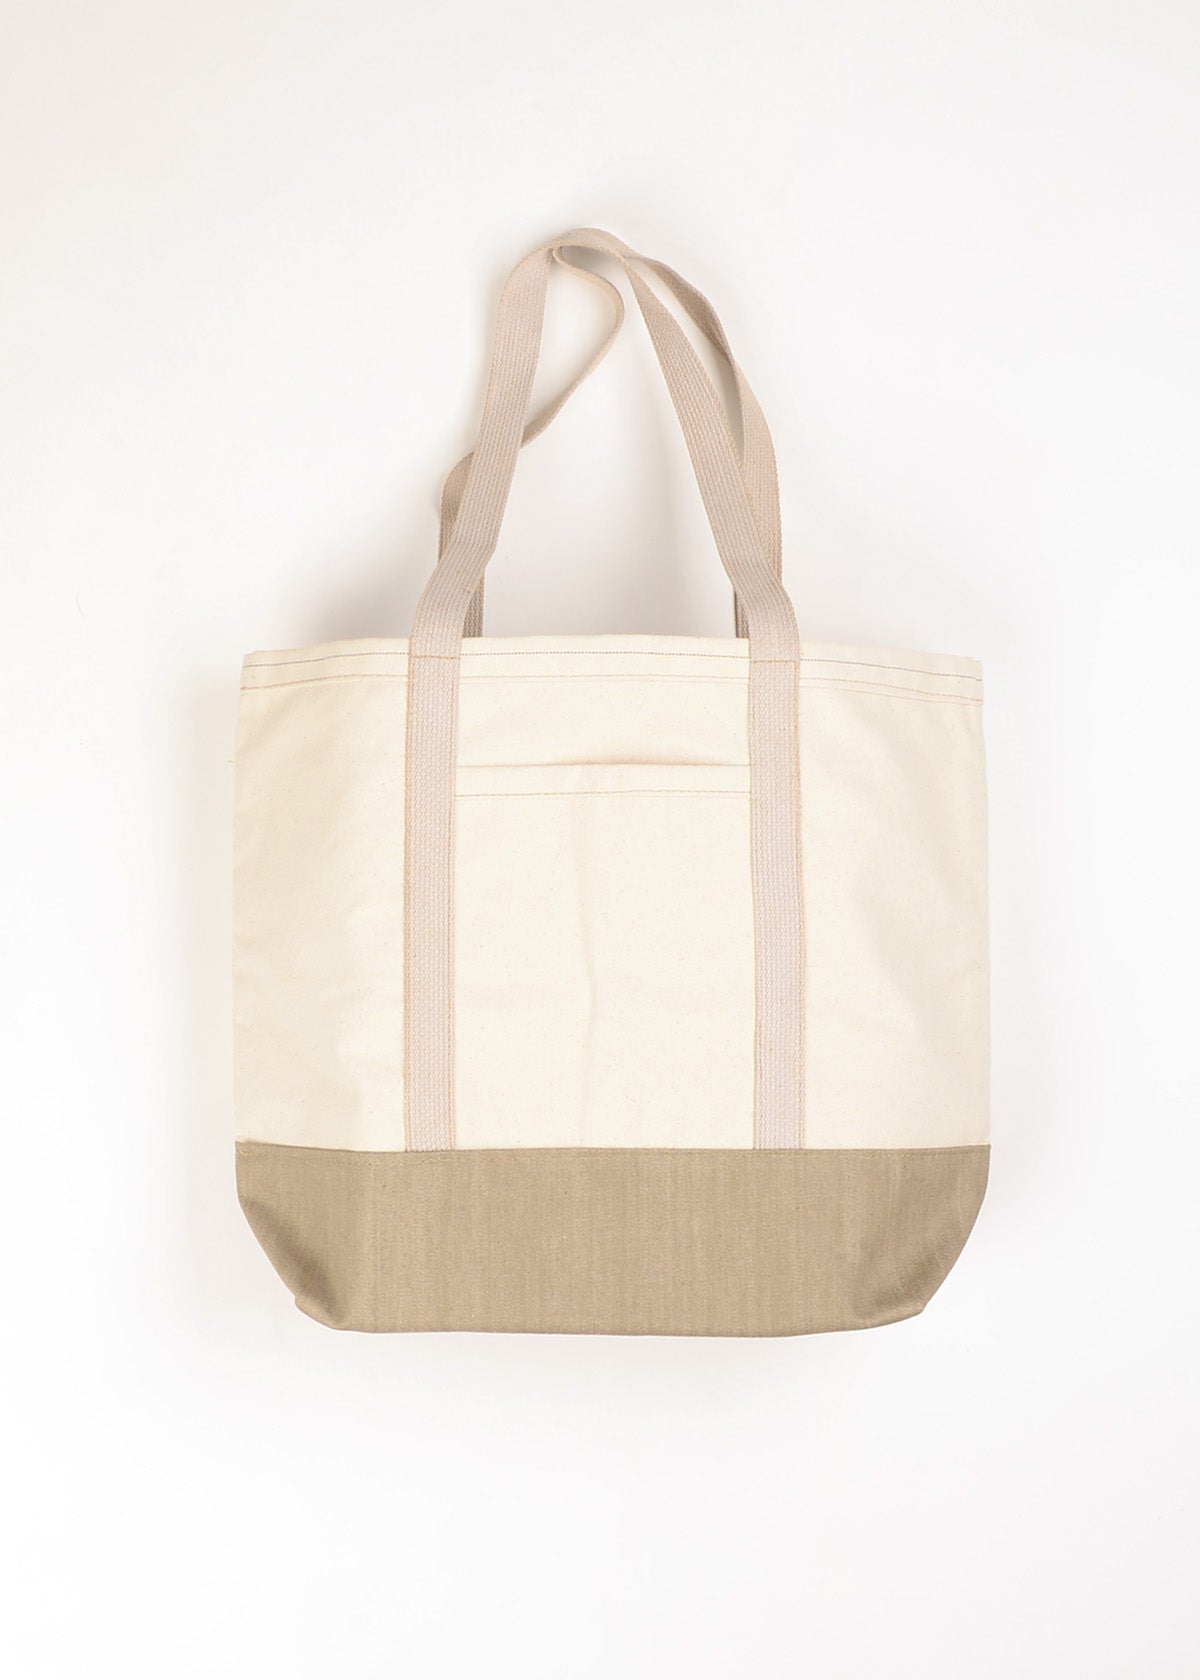 Wholesale Canvas Tote Bags, Washed Canvas Tote Bags with Side Pockets  Natural | Packaging Decor